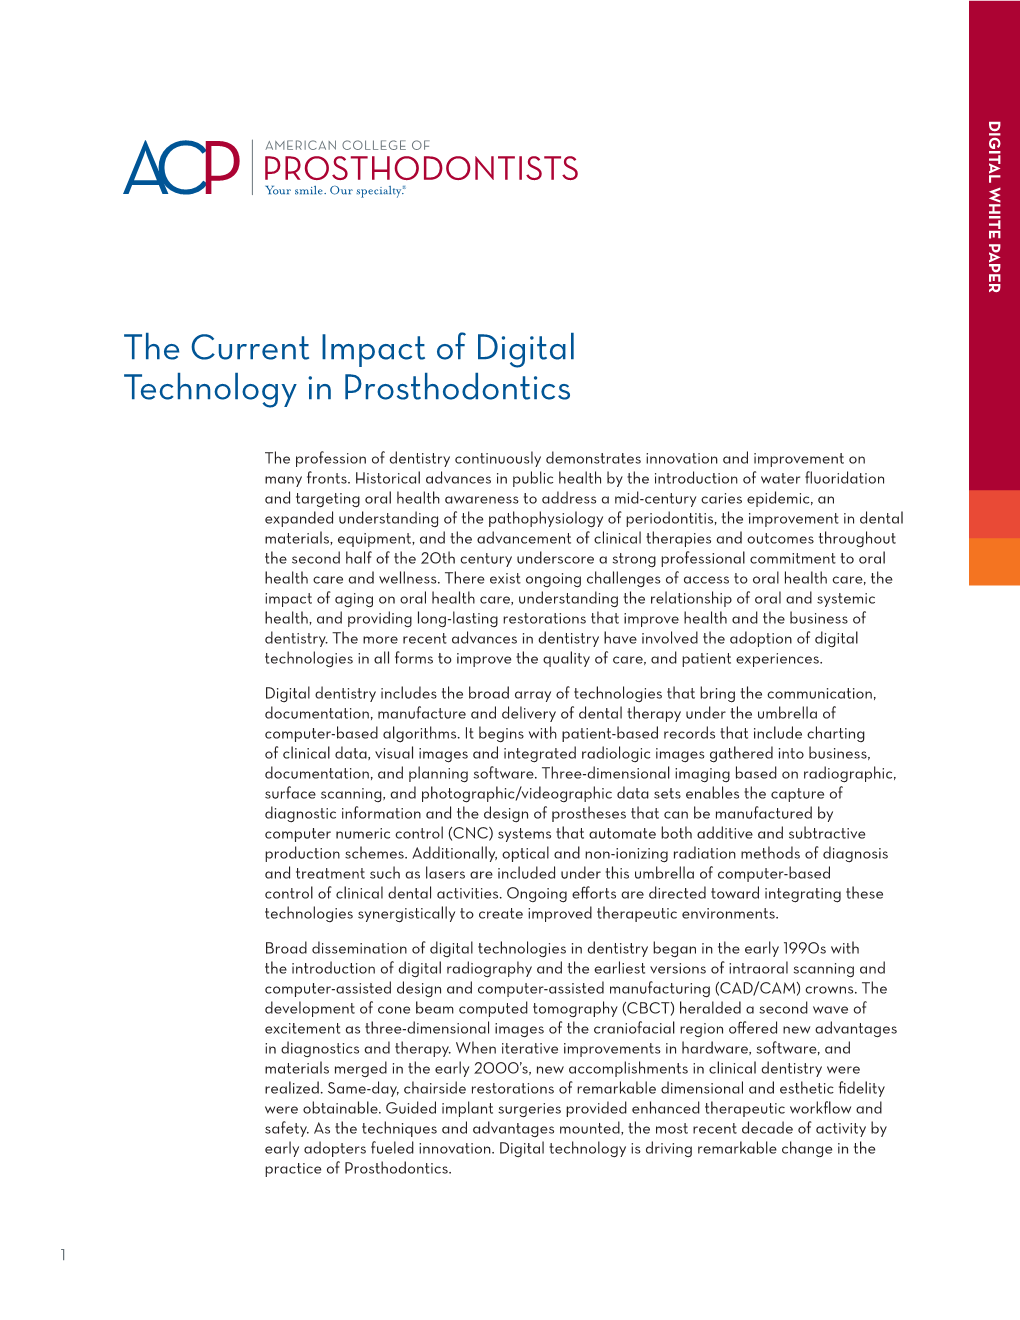 The Current Impact of Digital Technology in Prosthodontics